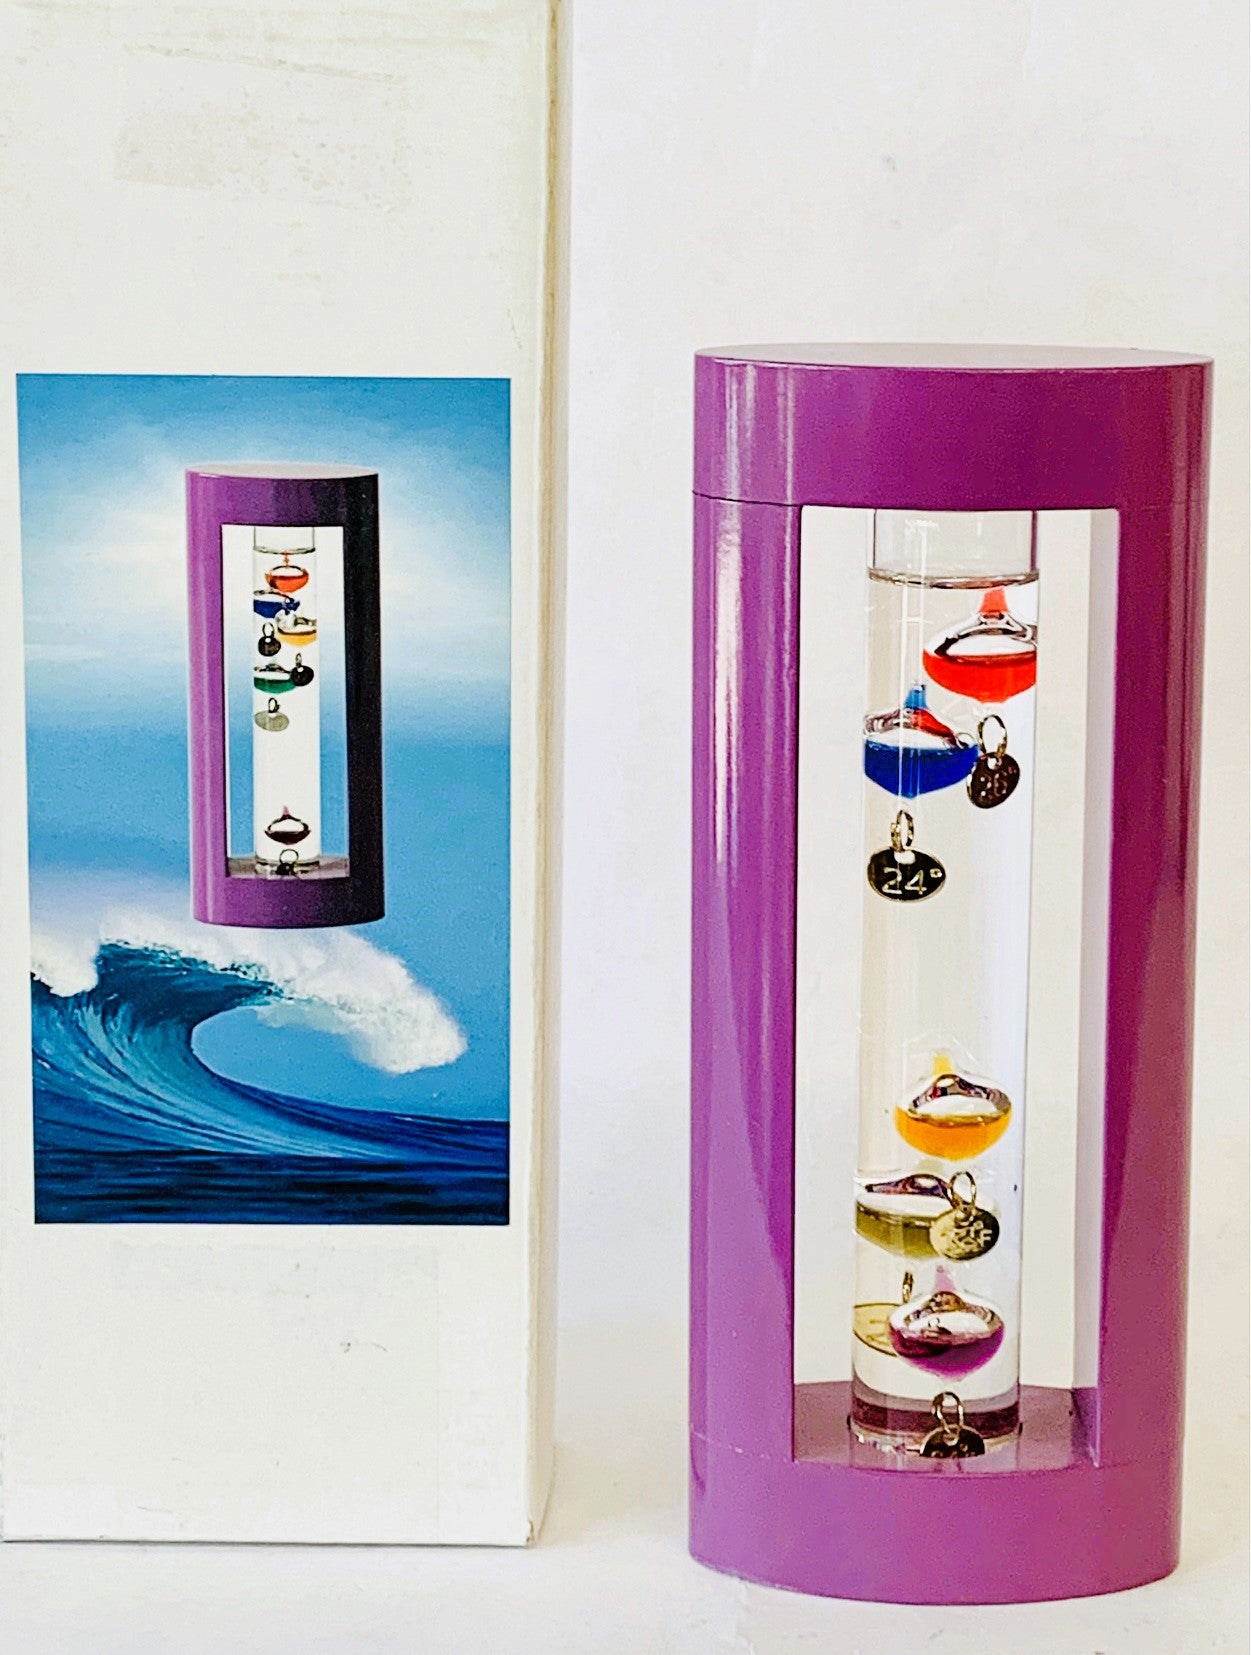 Galileo Thermometer in a wooden display 7"tall X 3"wide X 1.5"deep